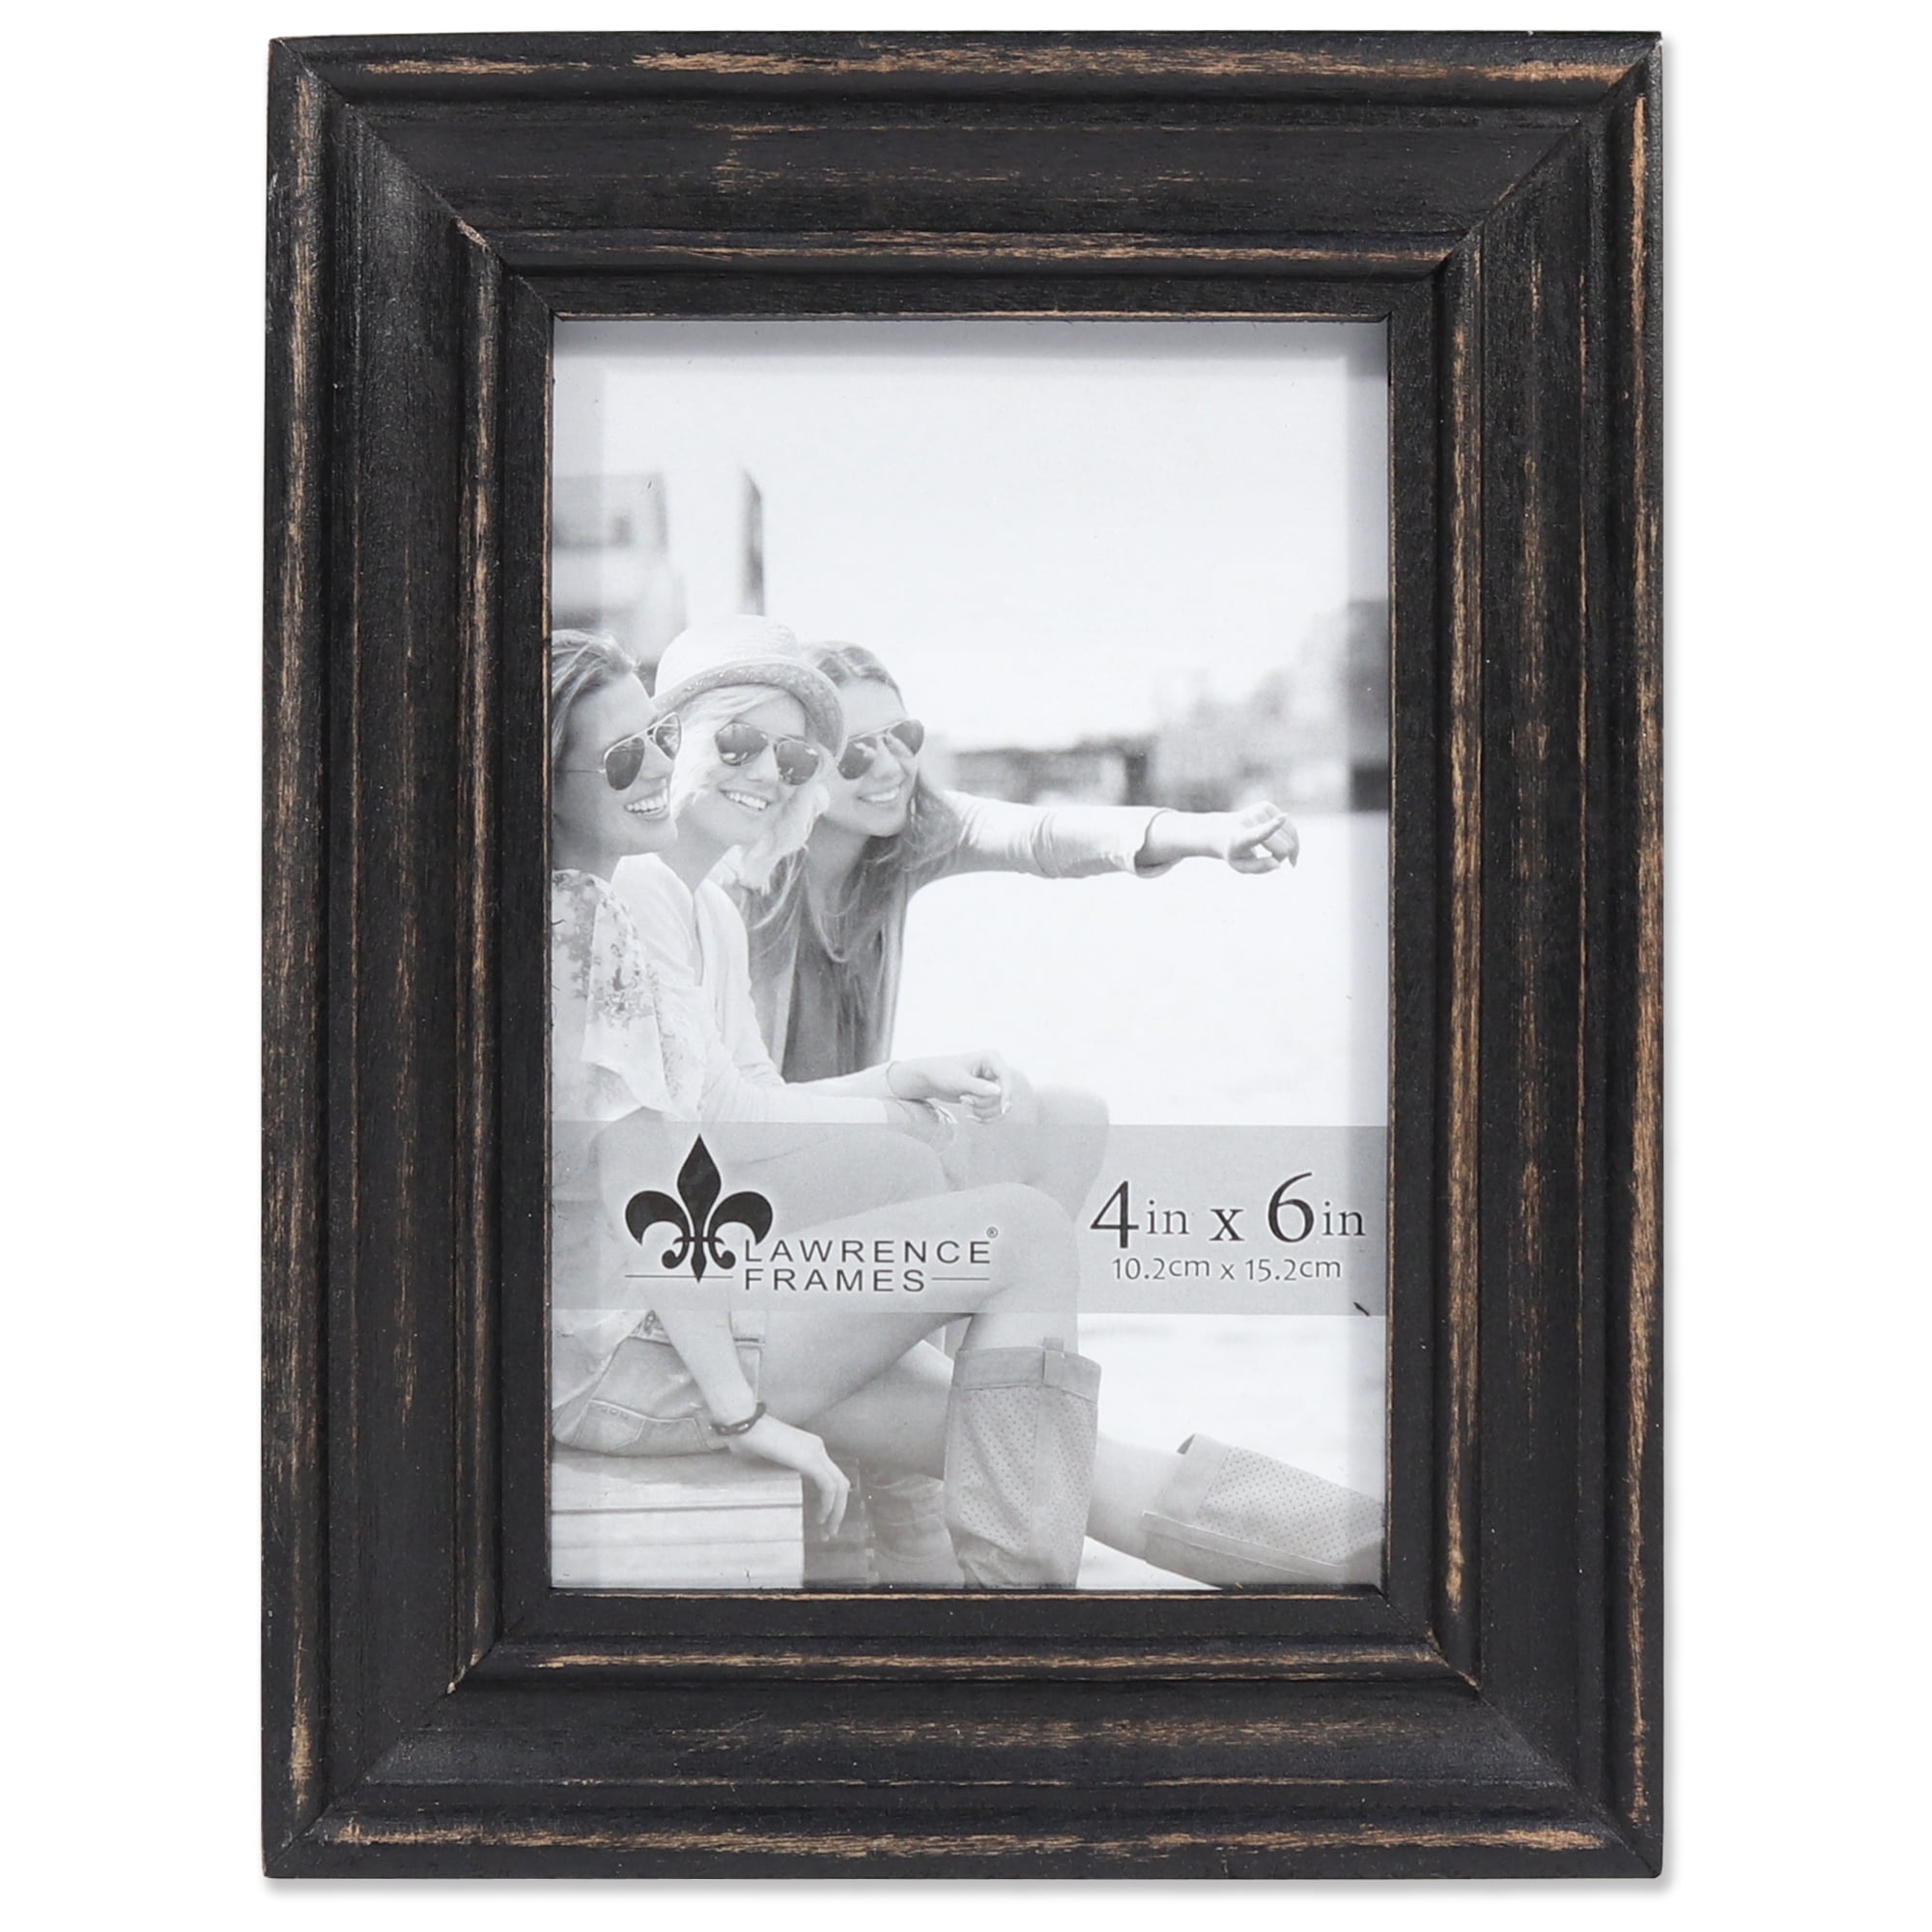 Lawrence Frames 5x7 Durham Weathered Black Wood Picture Frame 